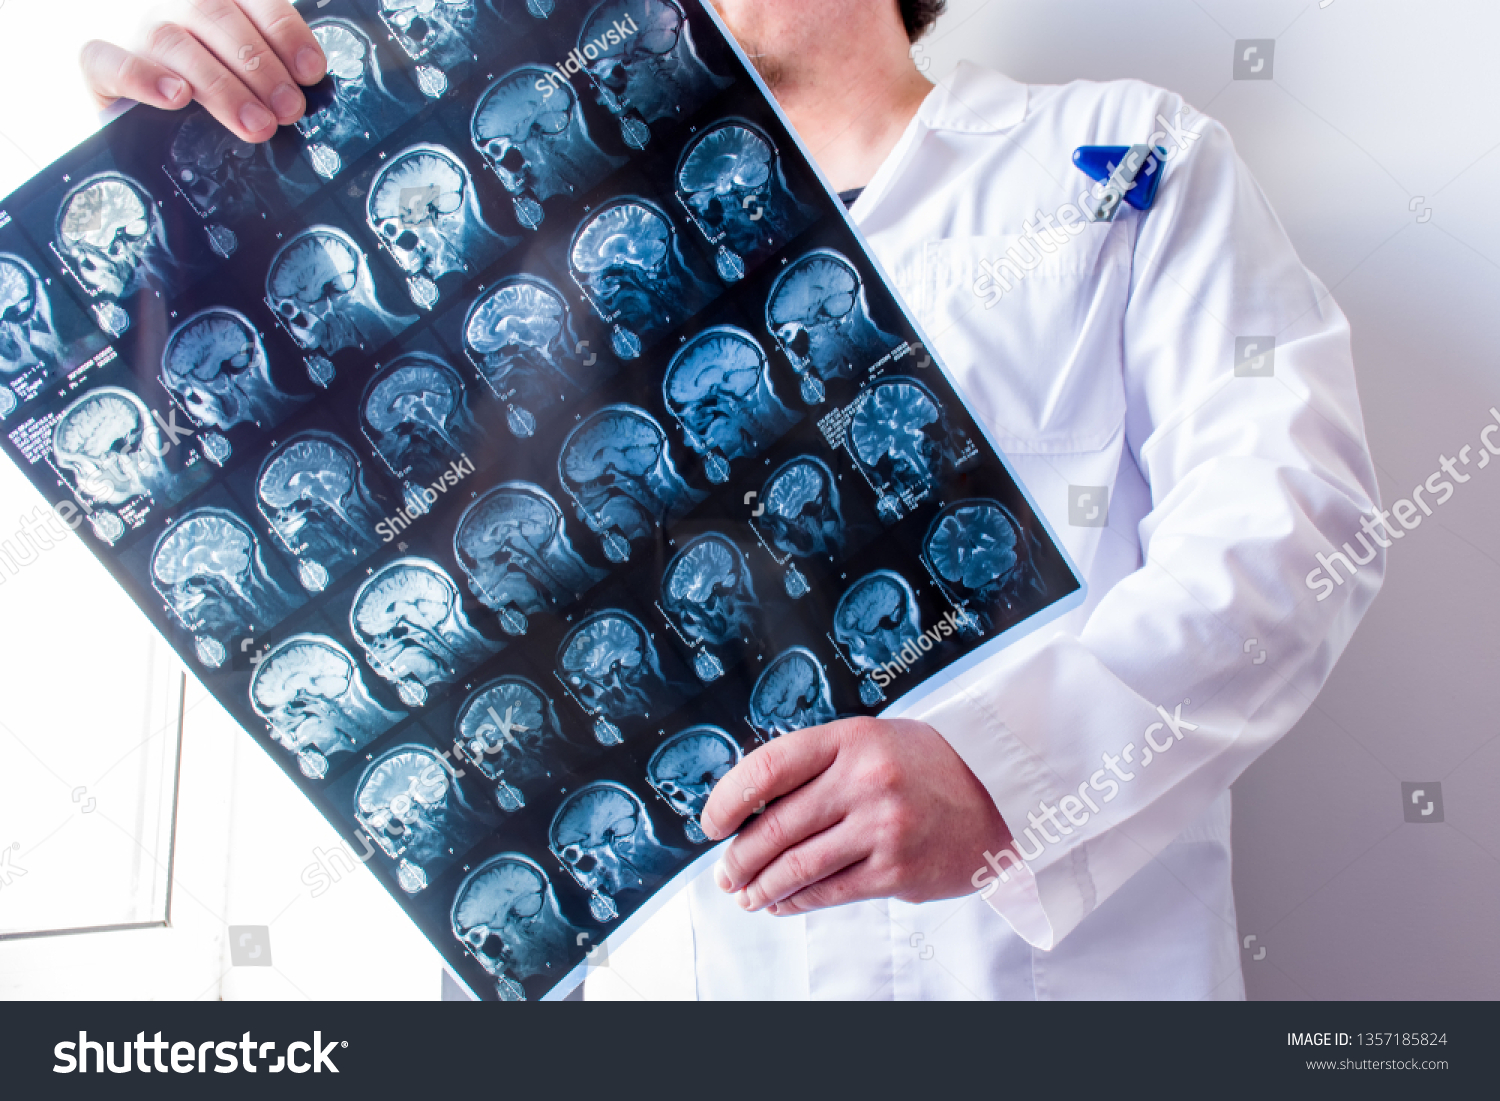 Neurologist or neurosurgeon upright holding MRI brain scanning viewing and exploring it for pathologies of central nervous system. Photo concept of MRI and CT diagnostics in neurology and neurosurgery #1357185824